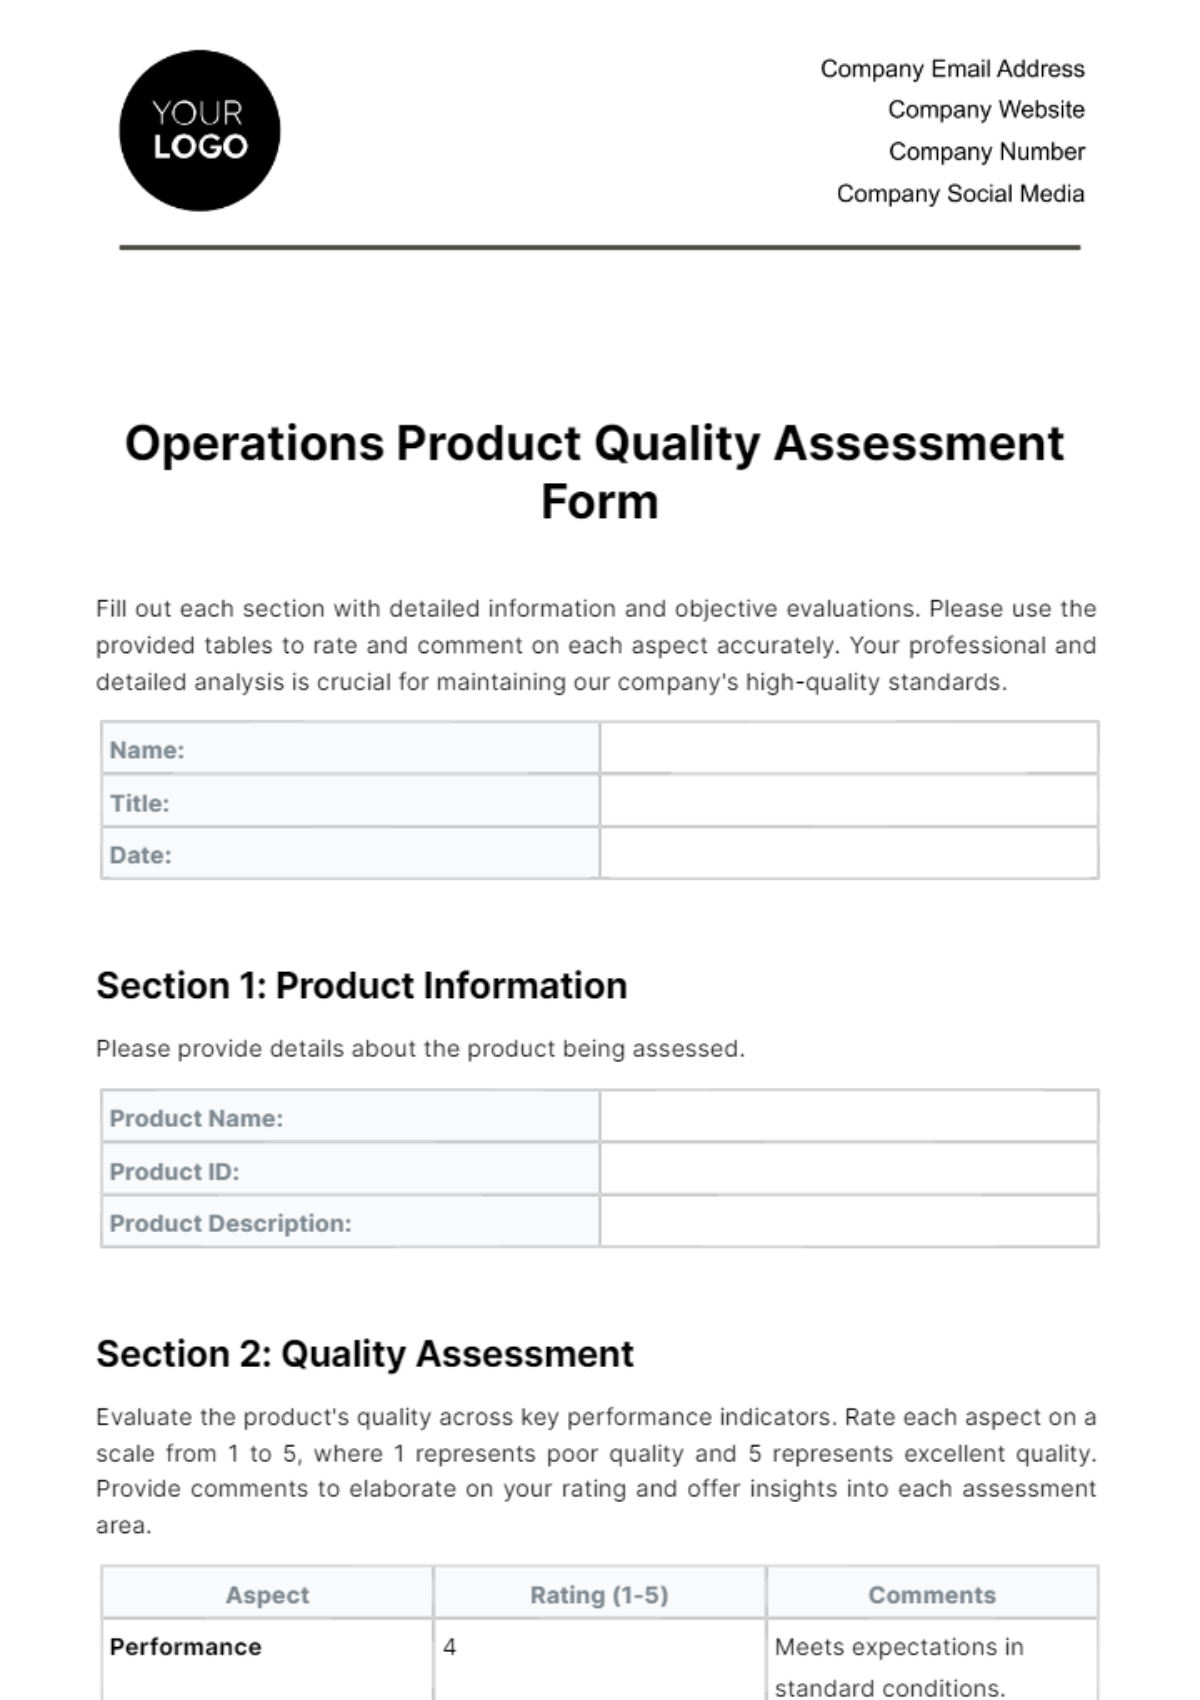 Operations Product Quality Assessment Form Template